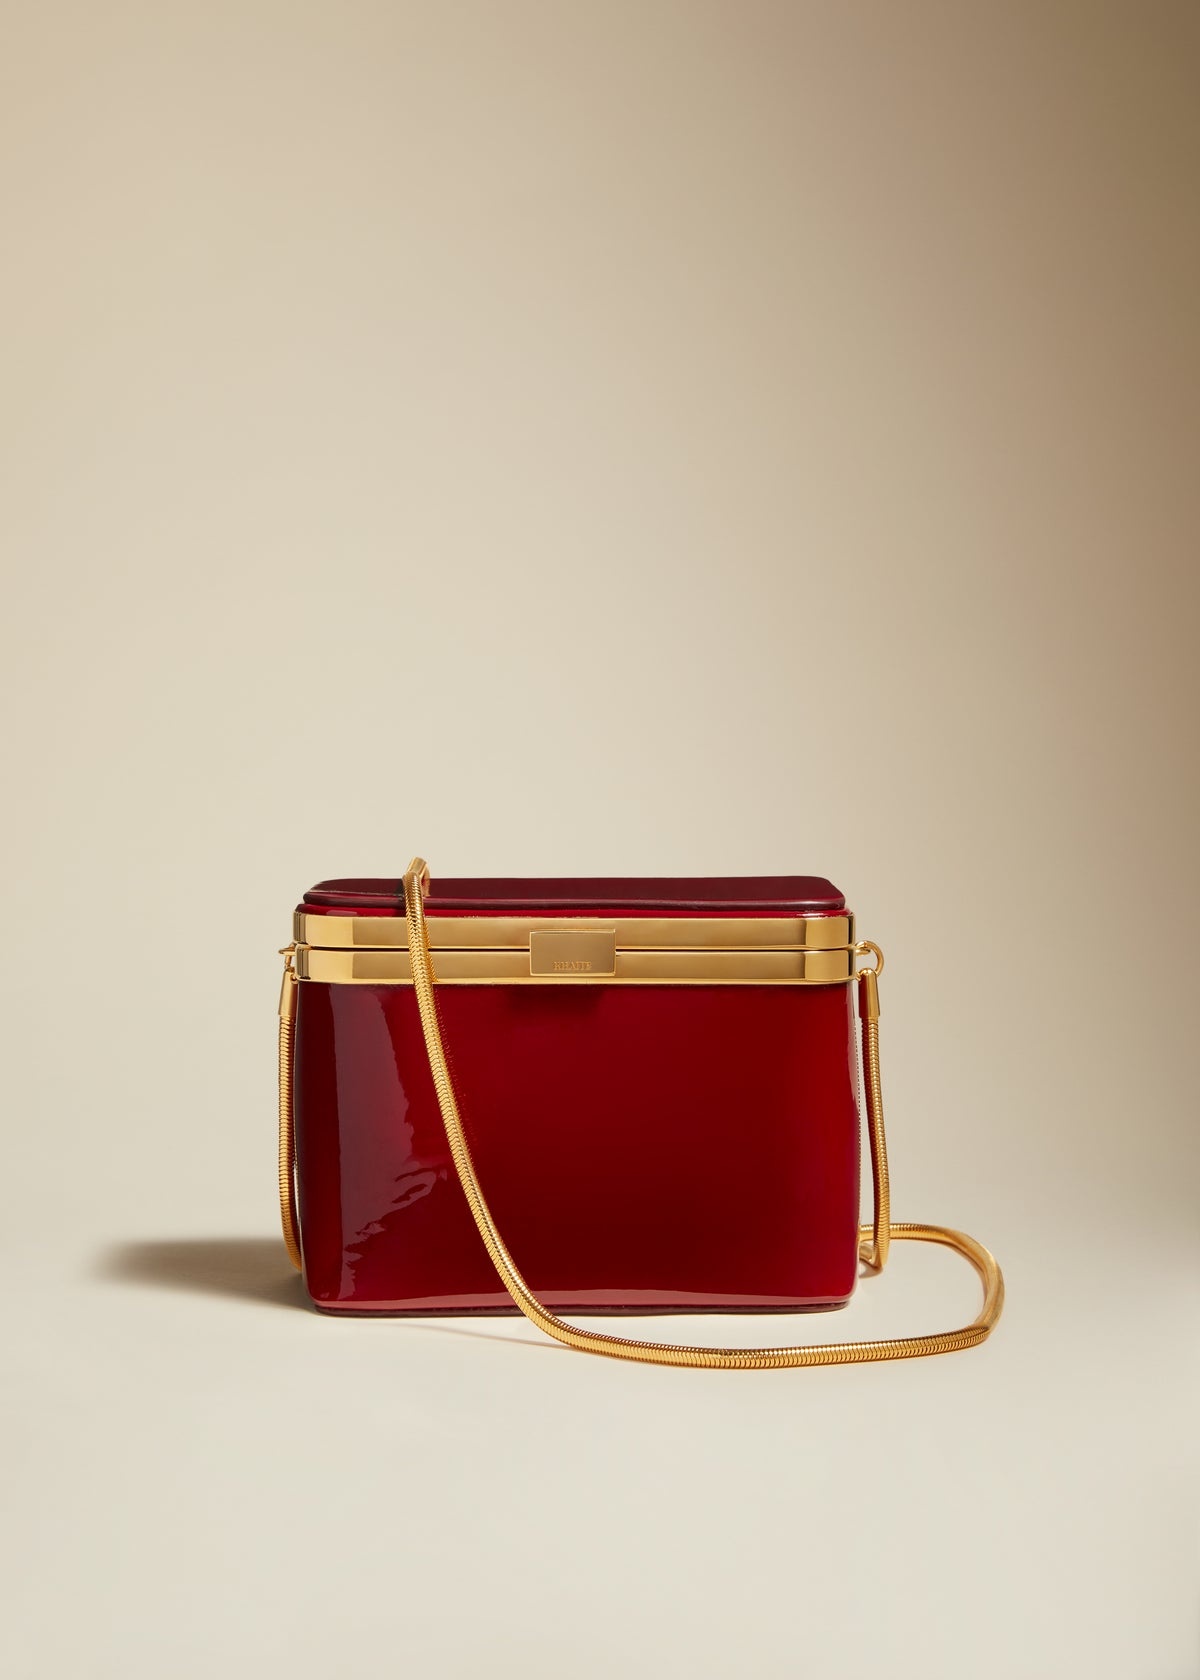 The Eloise Minaudière in Deep Red Patent Leather - 1